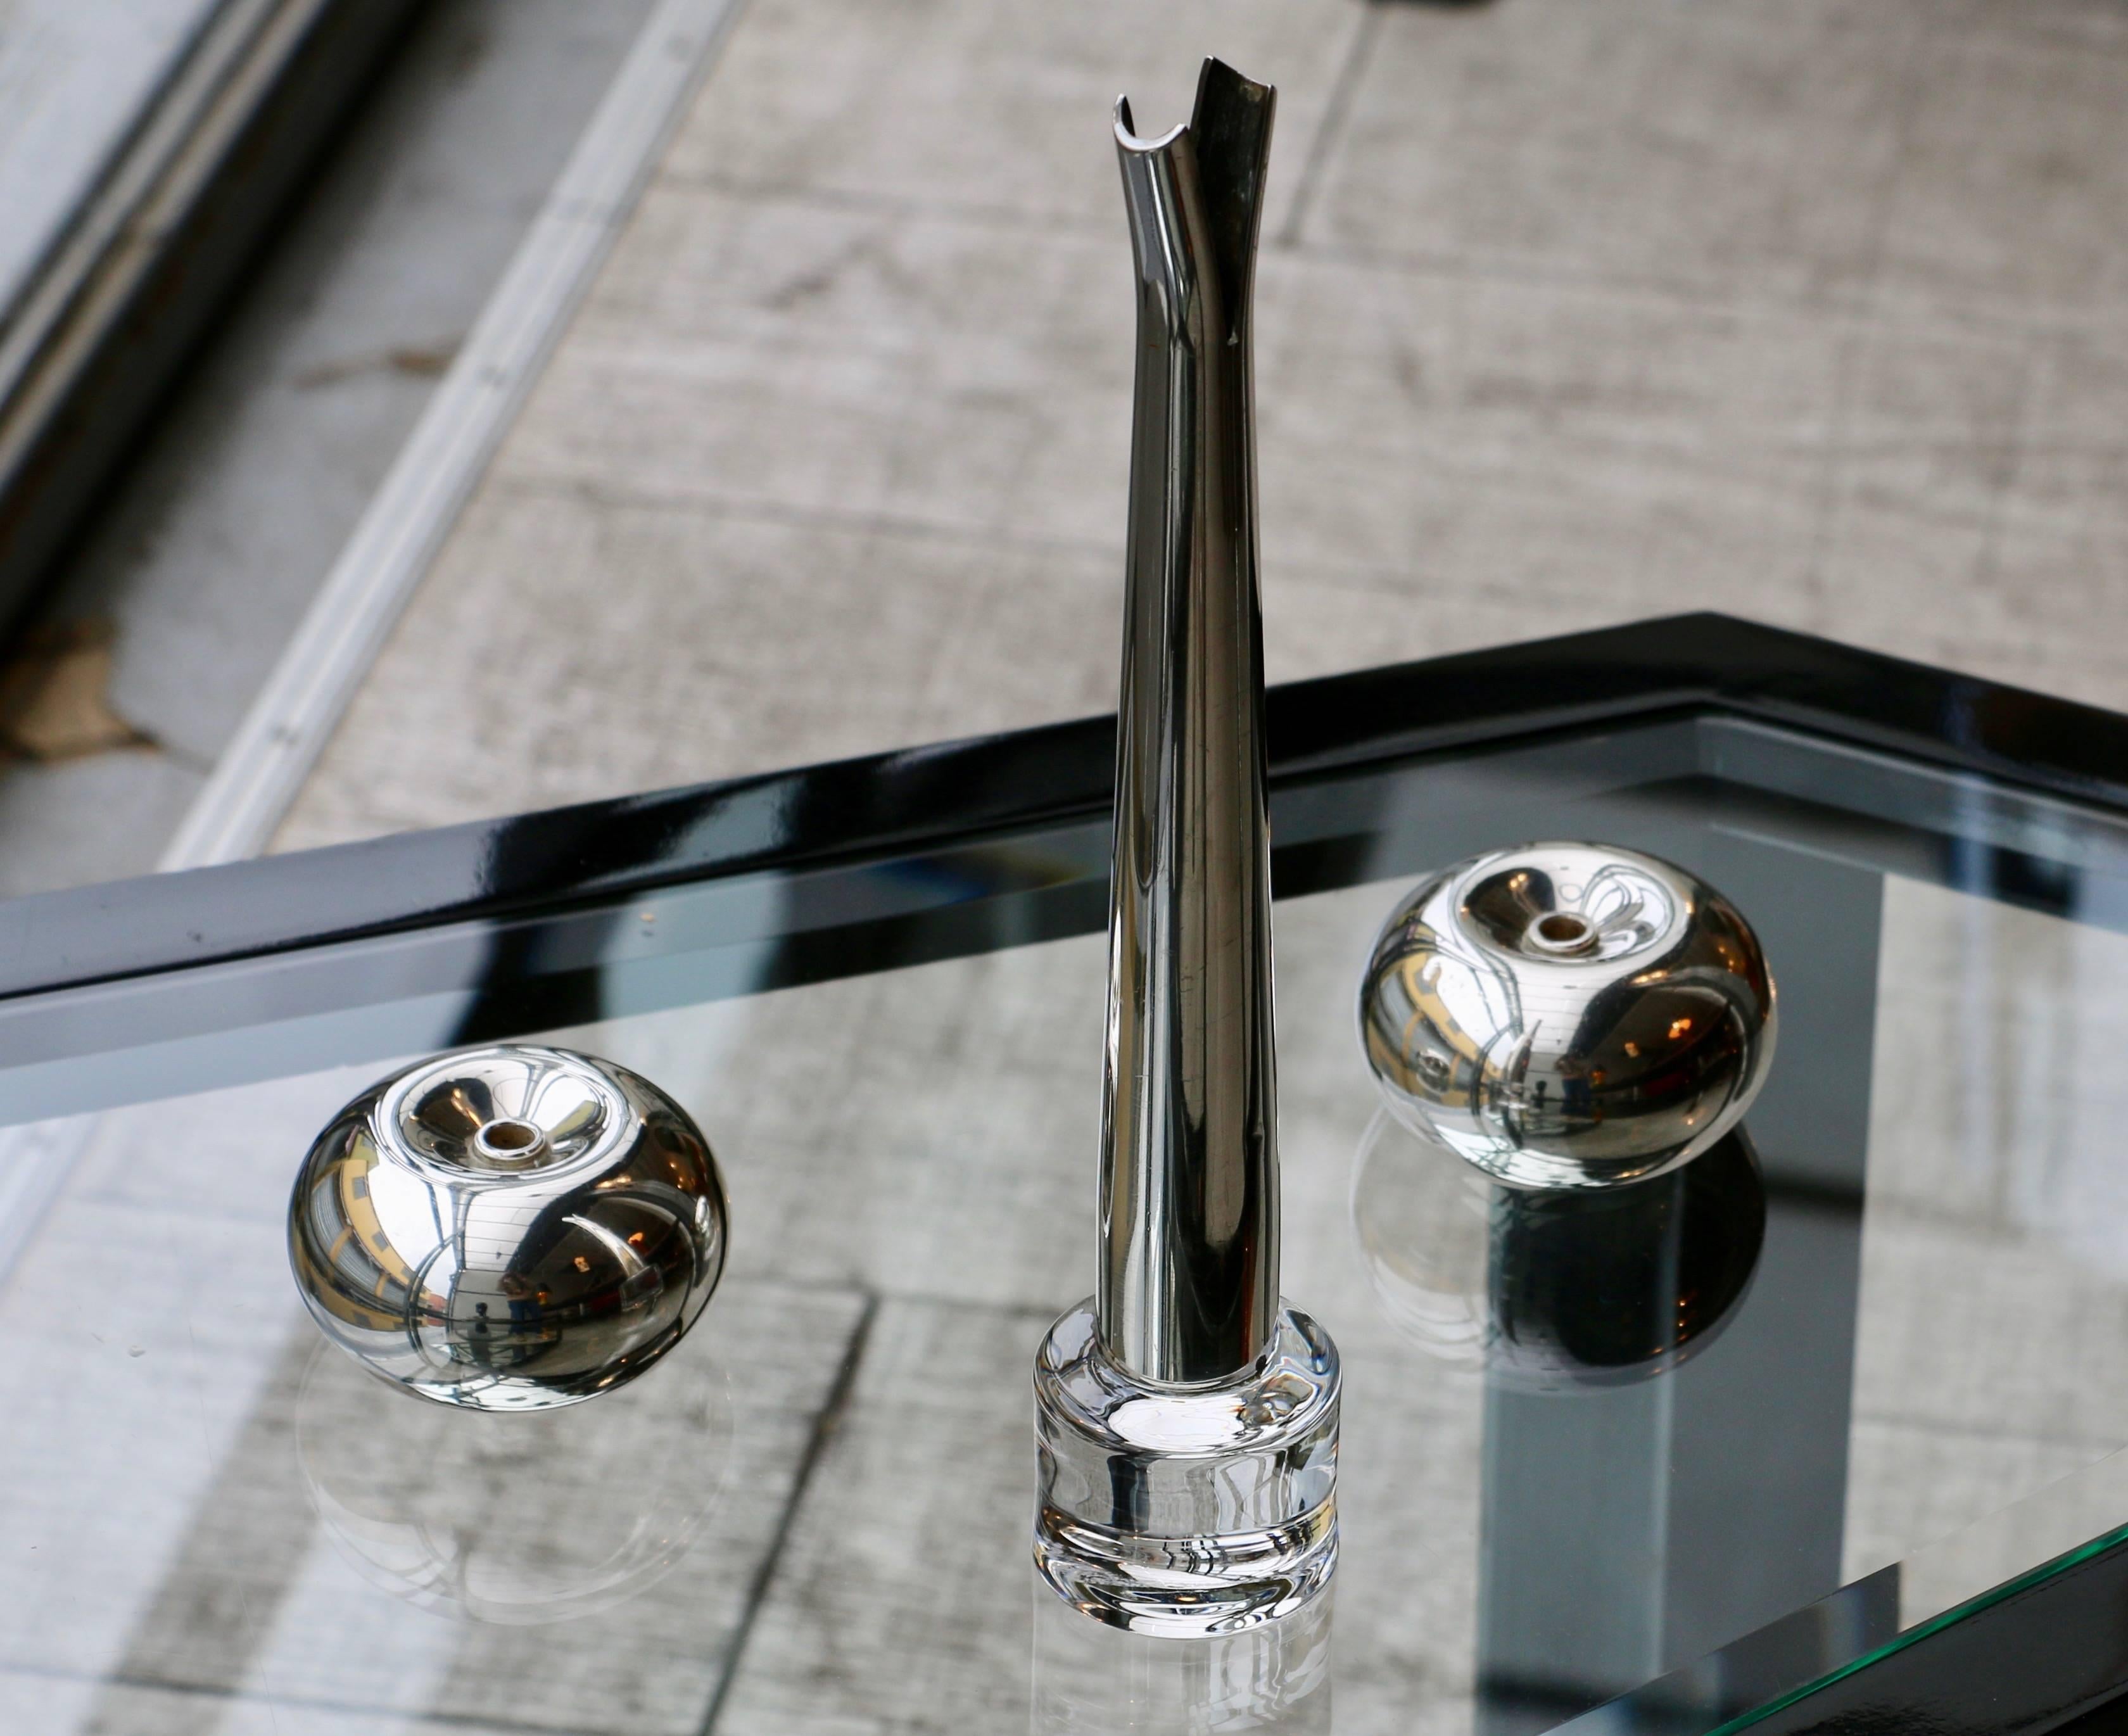 Pair of silvered metal candleholders by Sabattini.
Italy, 2000.